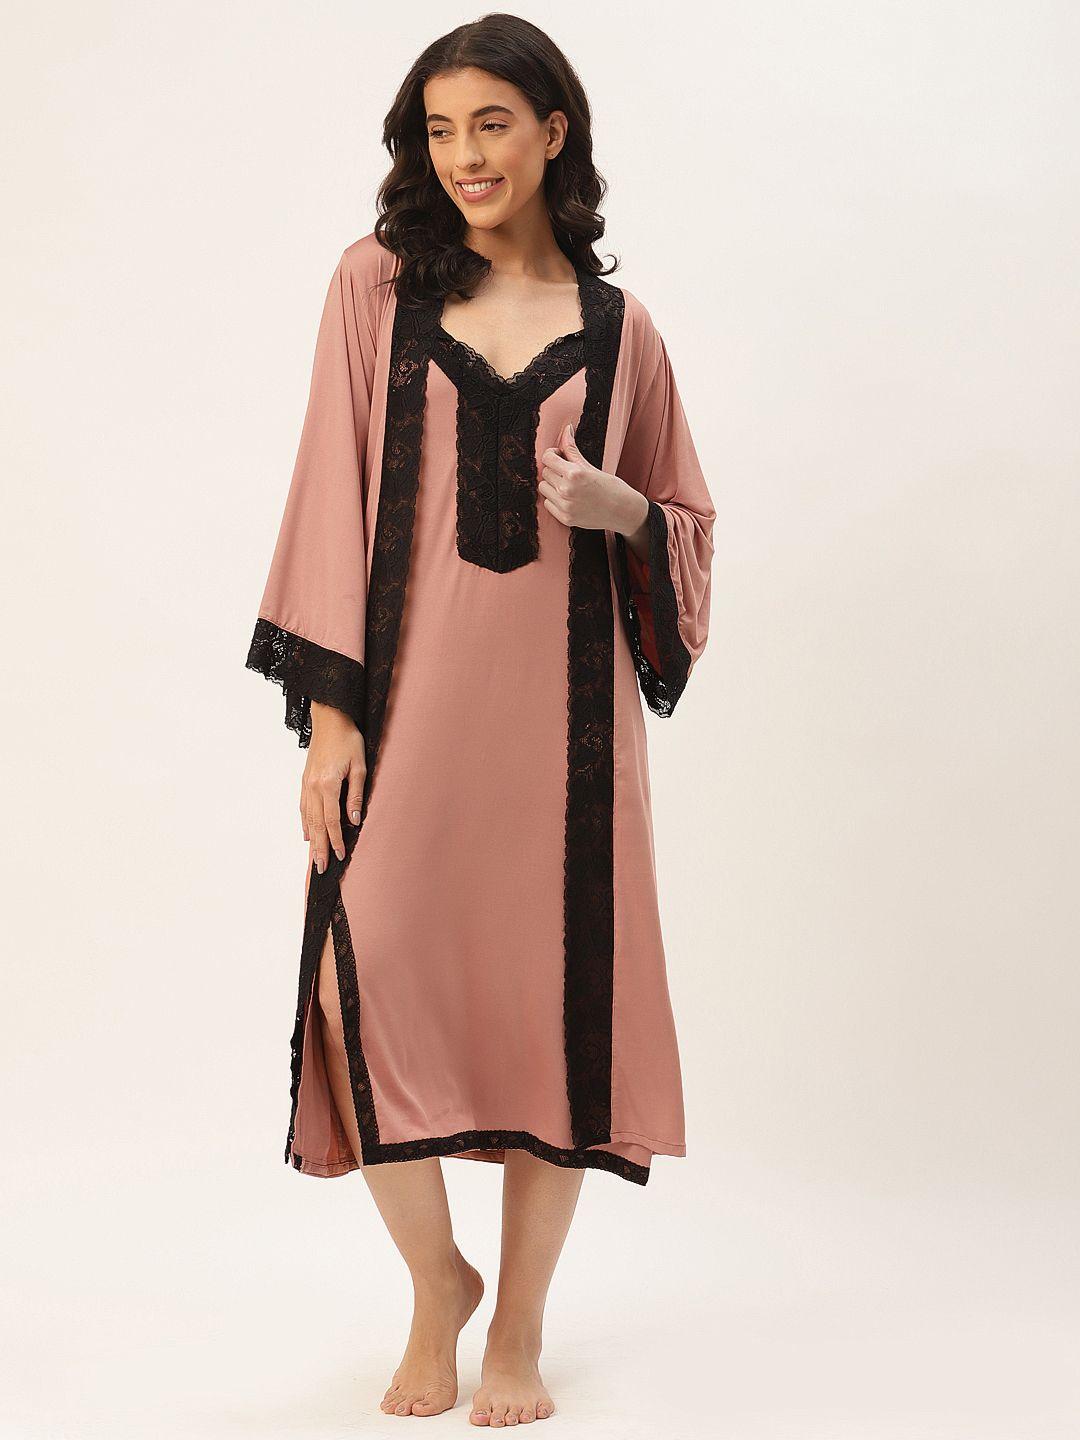 ms-lingies-peach-coloured-&-black-modal-baby-doll-with-robe